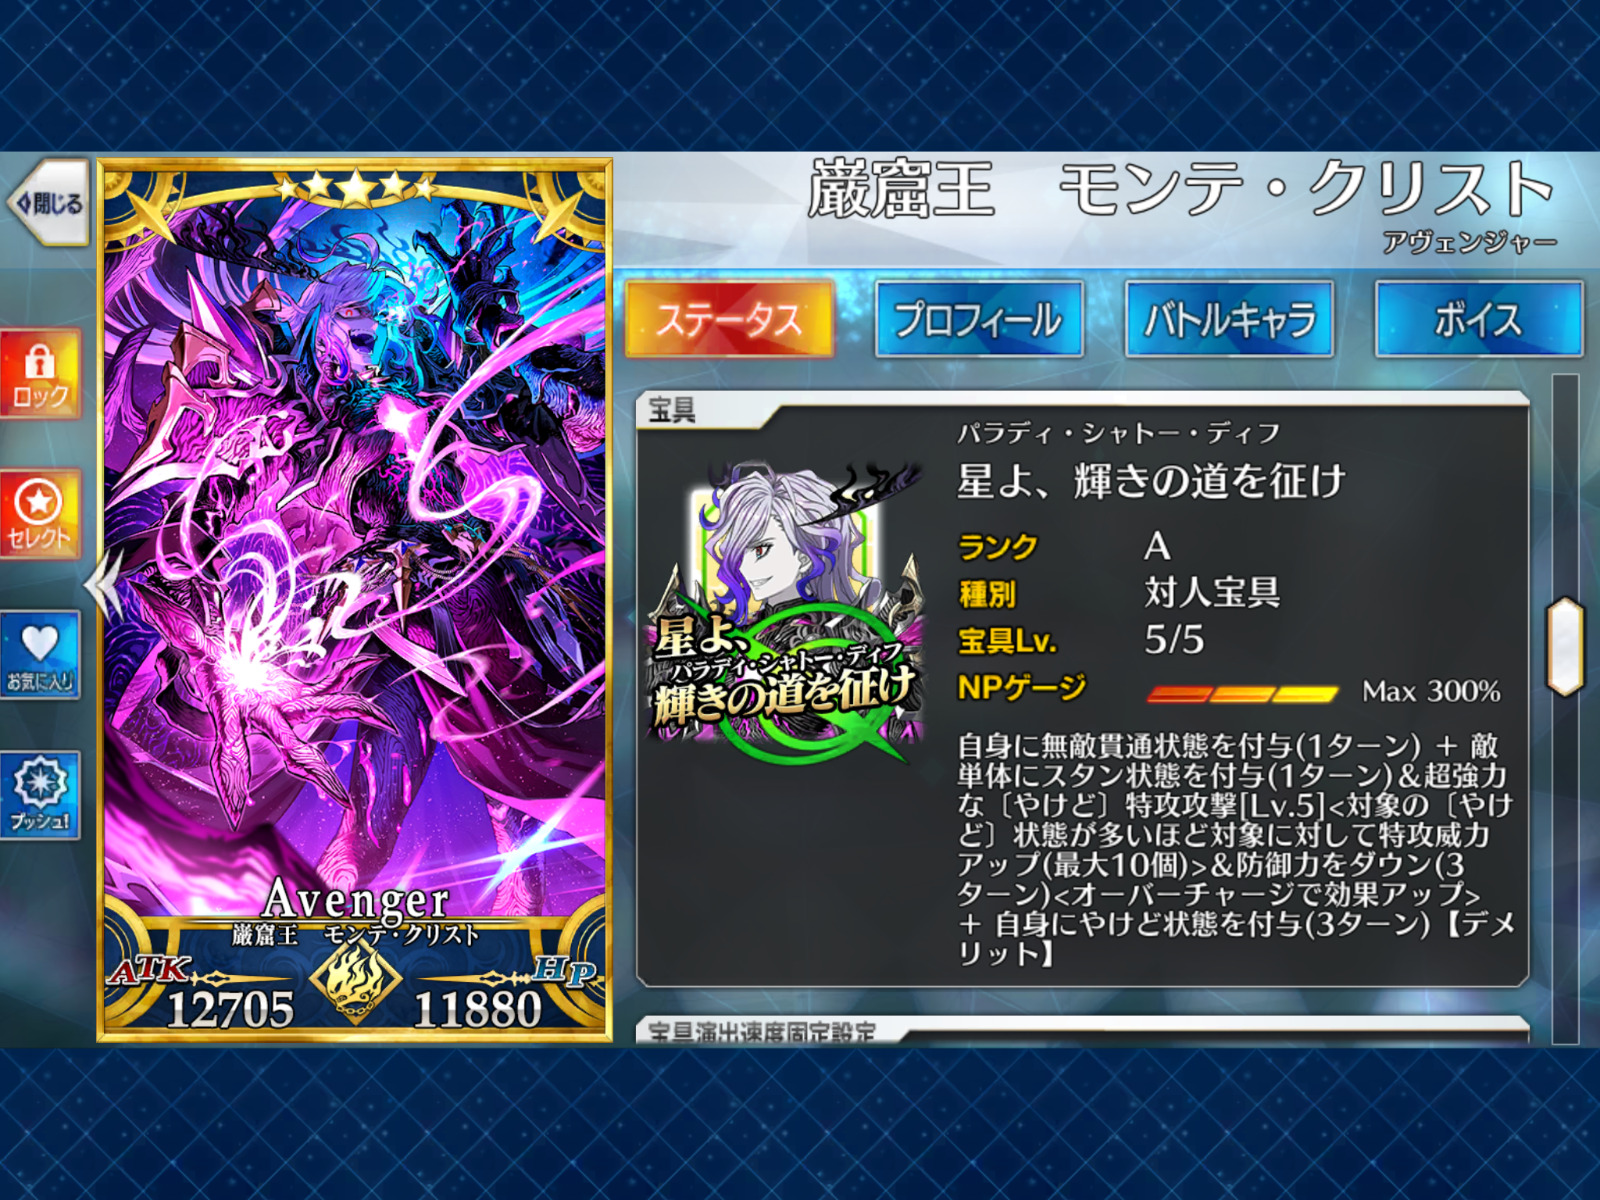 JP Fate Grand Order FGO Endgame Account OC: Count NP5 + Alice + Marie Alter